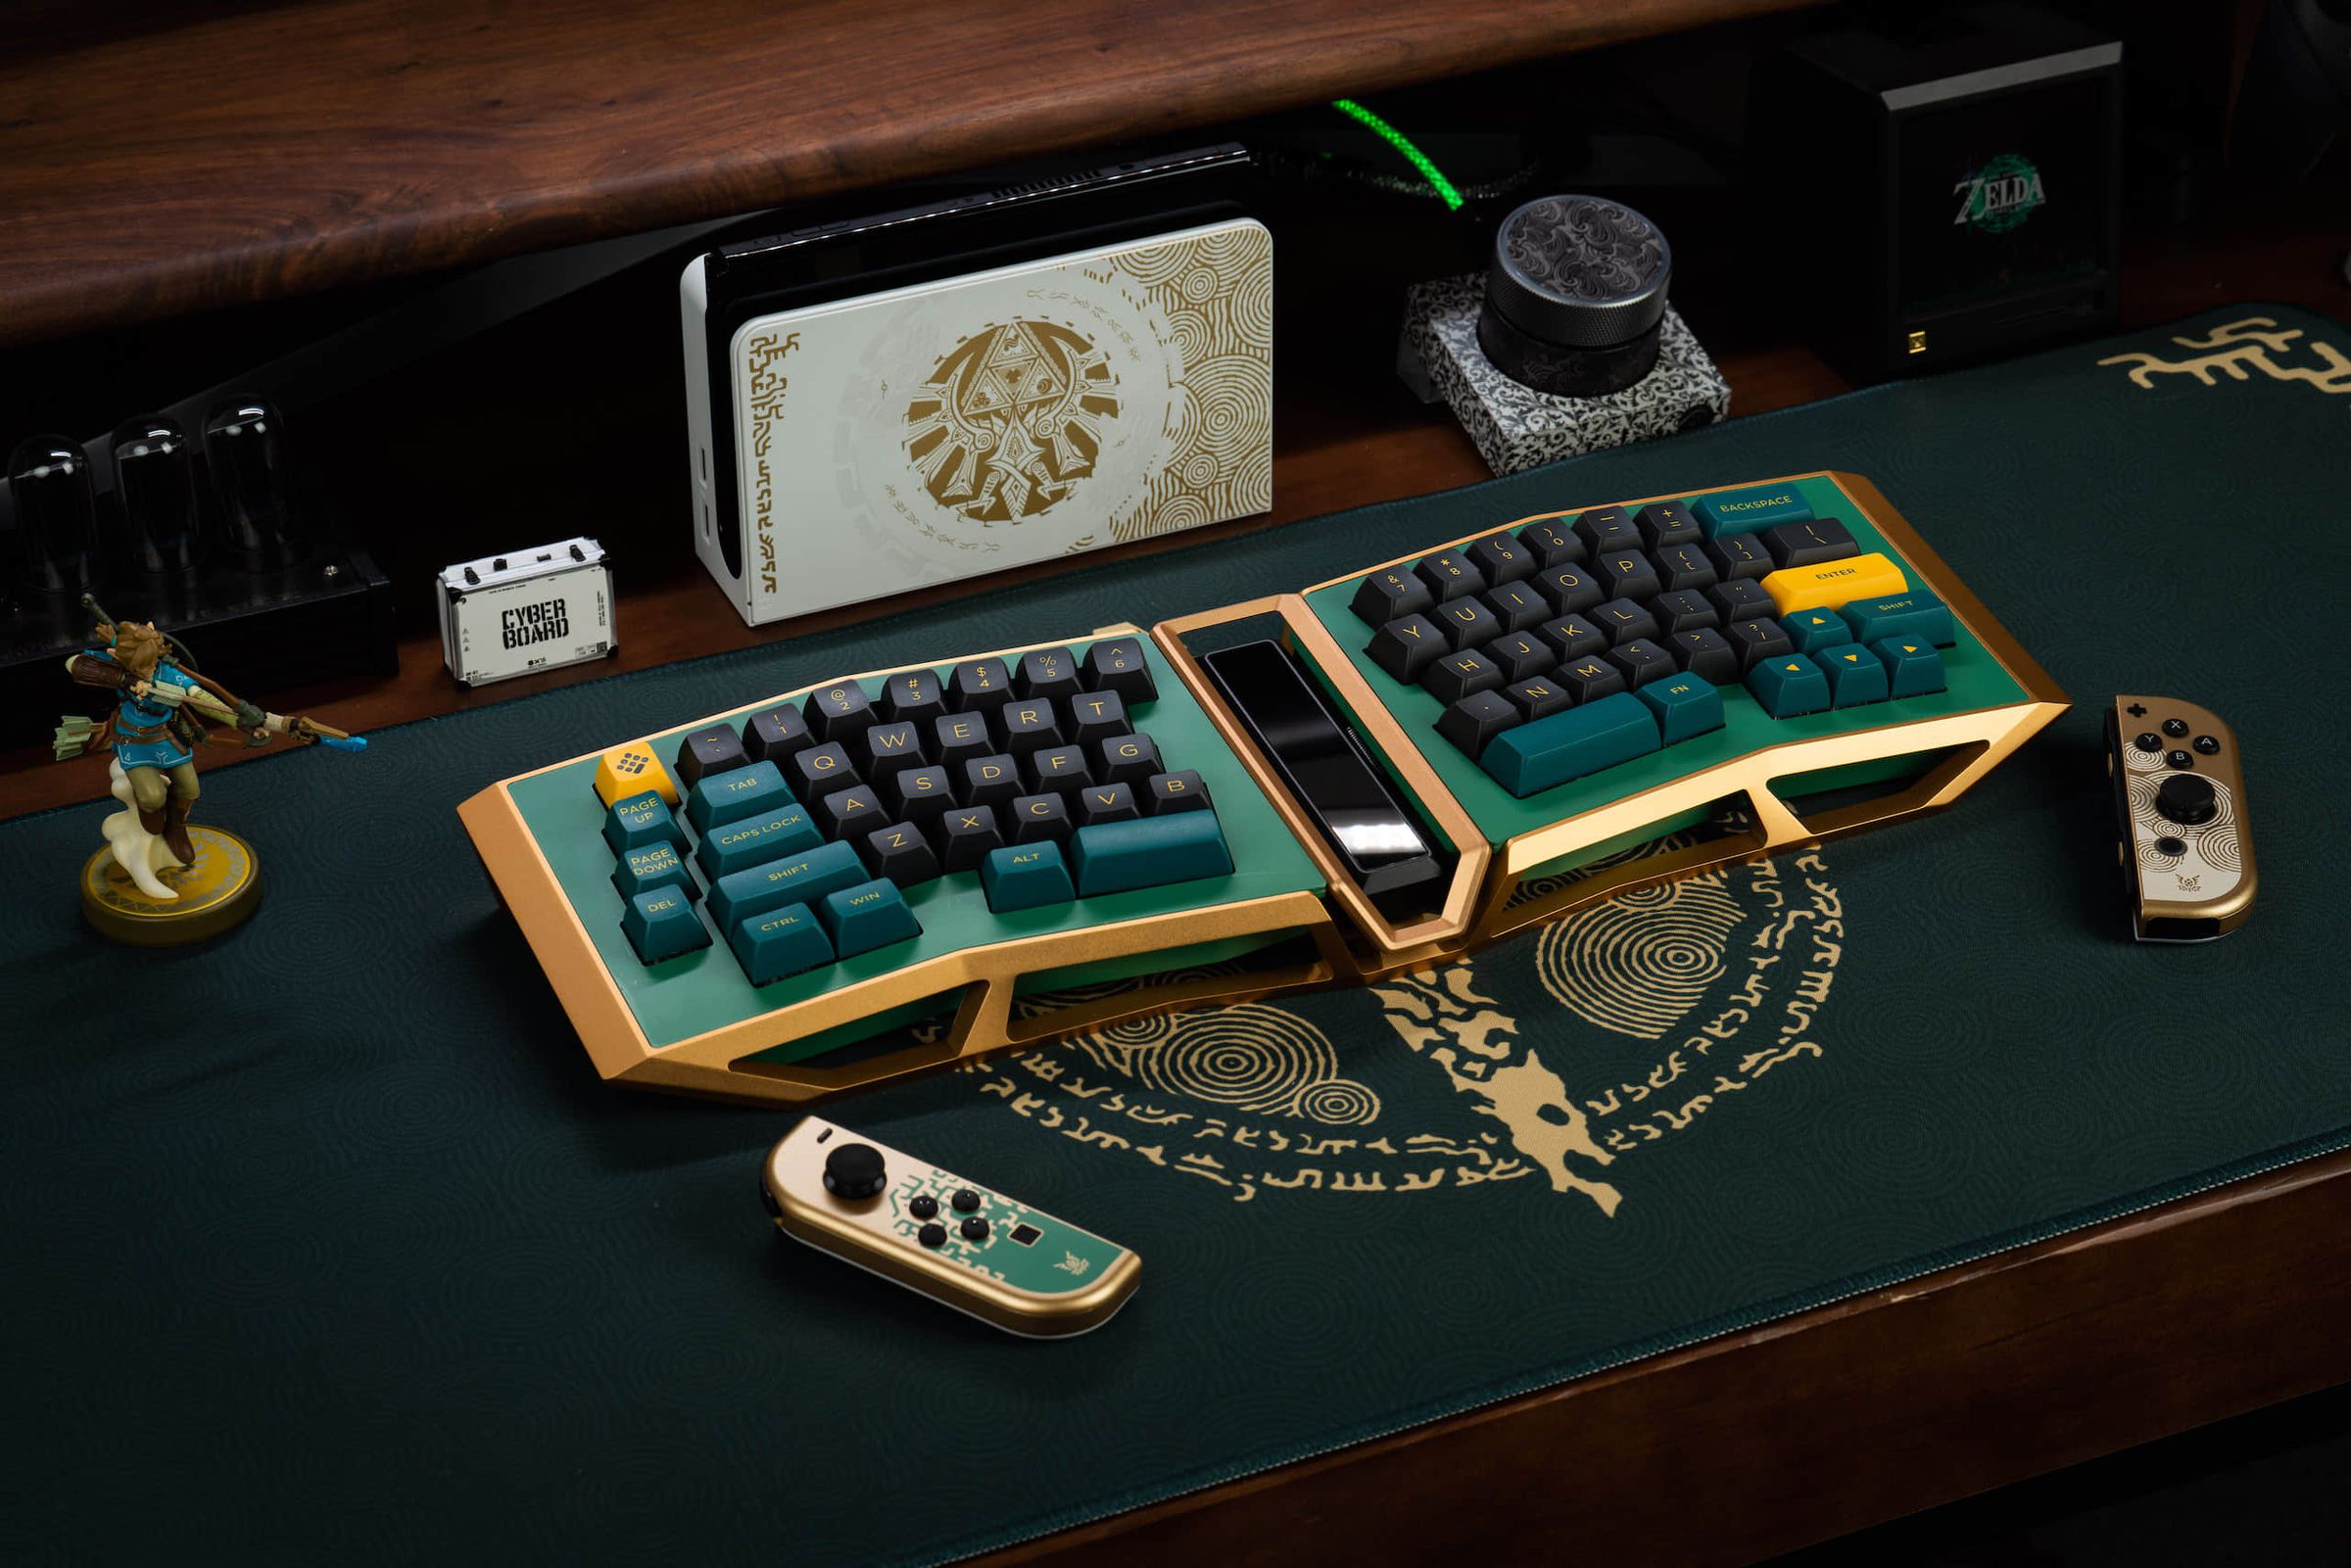 An Angry Miao AM AFA mechanical keyboard in a colorway themed after The Legend of Zelda: Tears of the Kingdom, sitting on a desk setup with a Zelda aesthetic.